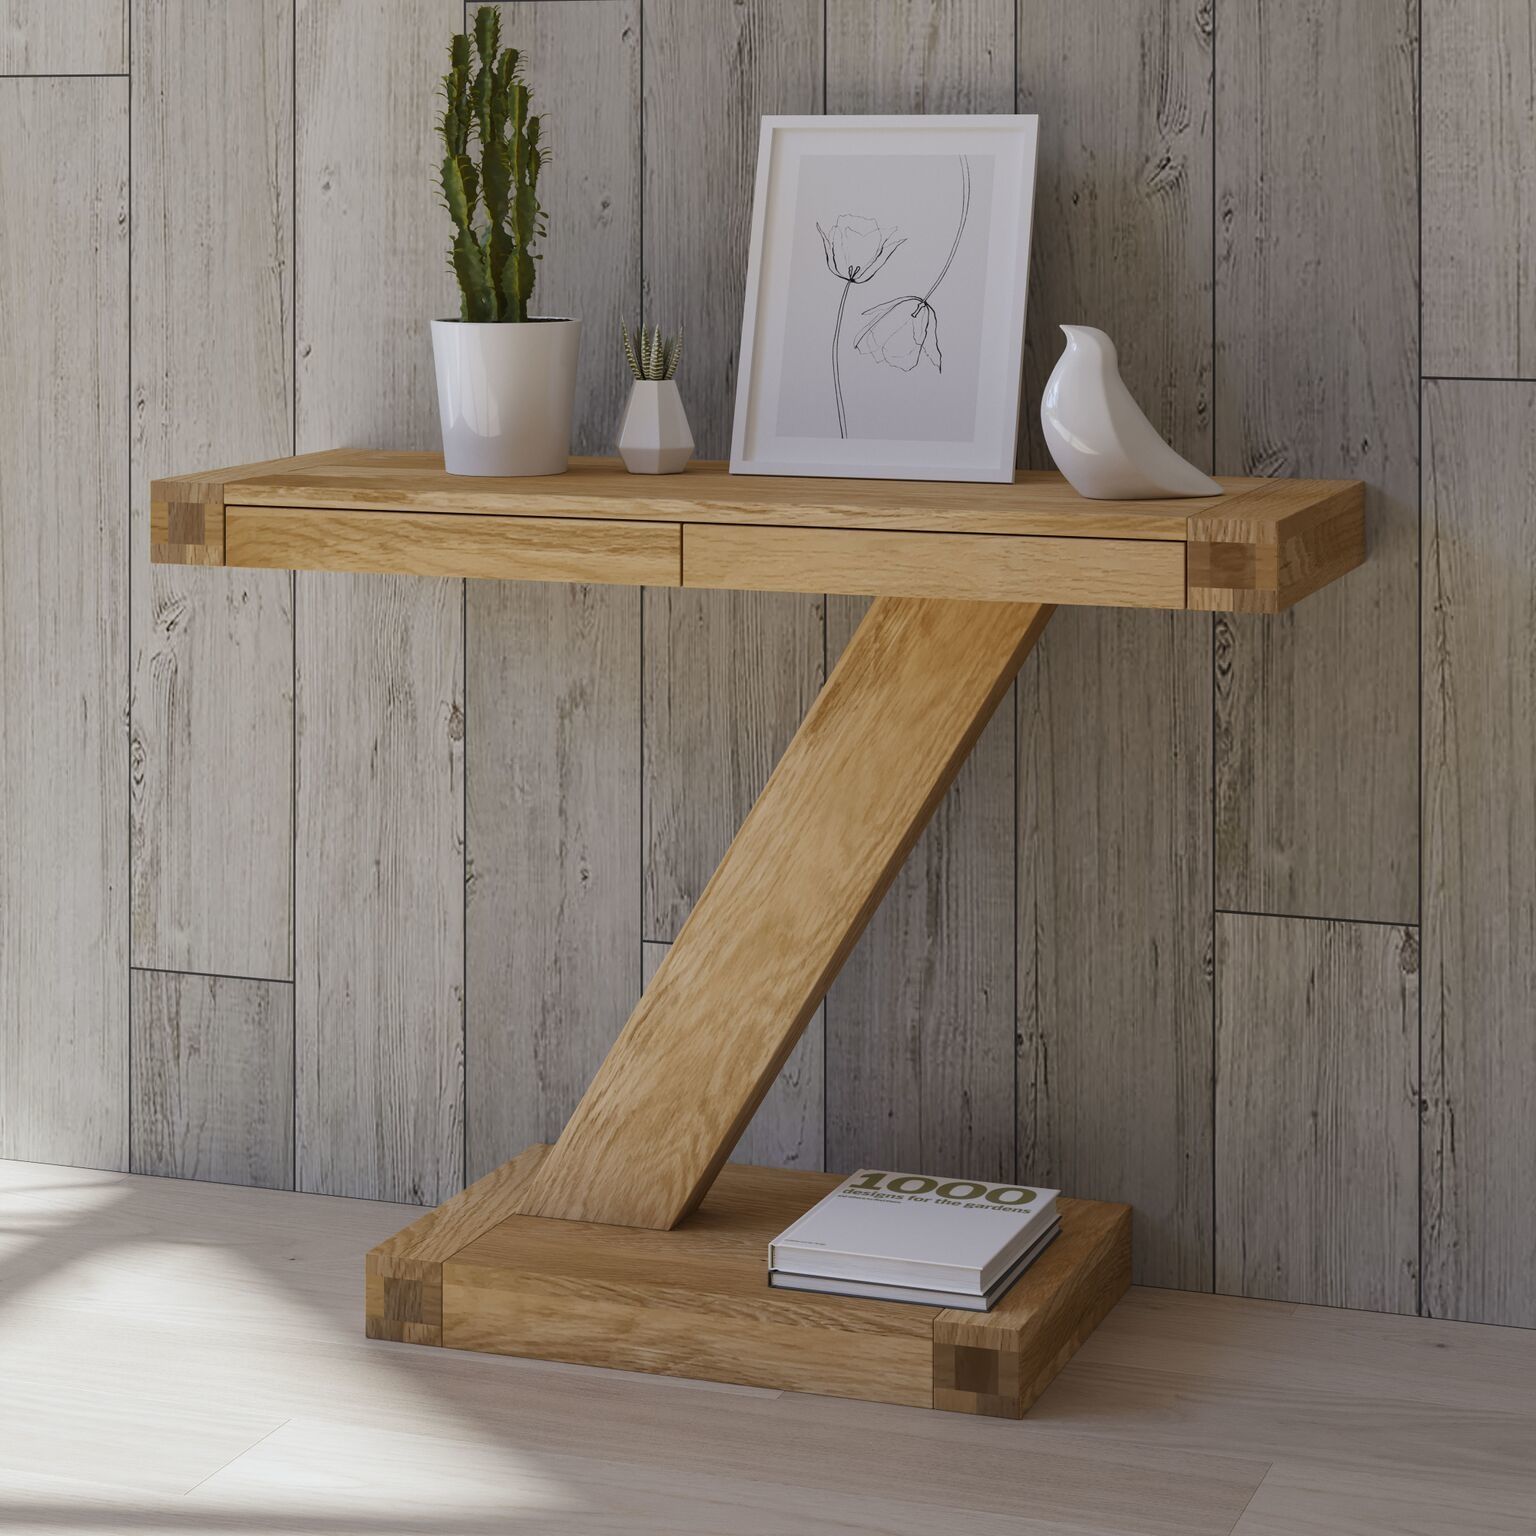 Z Designer Solid Oak Modern Console Table – Freitaslaf Net For Metal And Oak Console Tables (View 10 of 20)